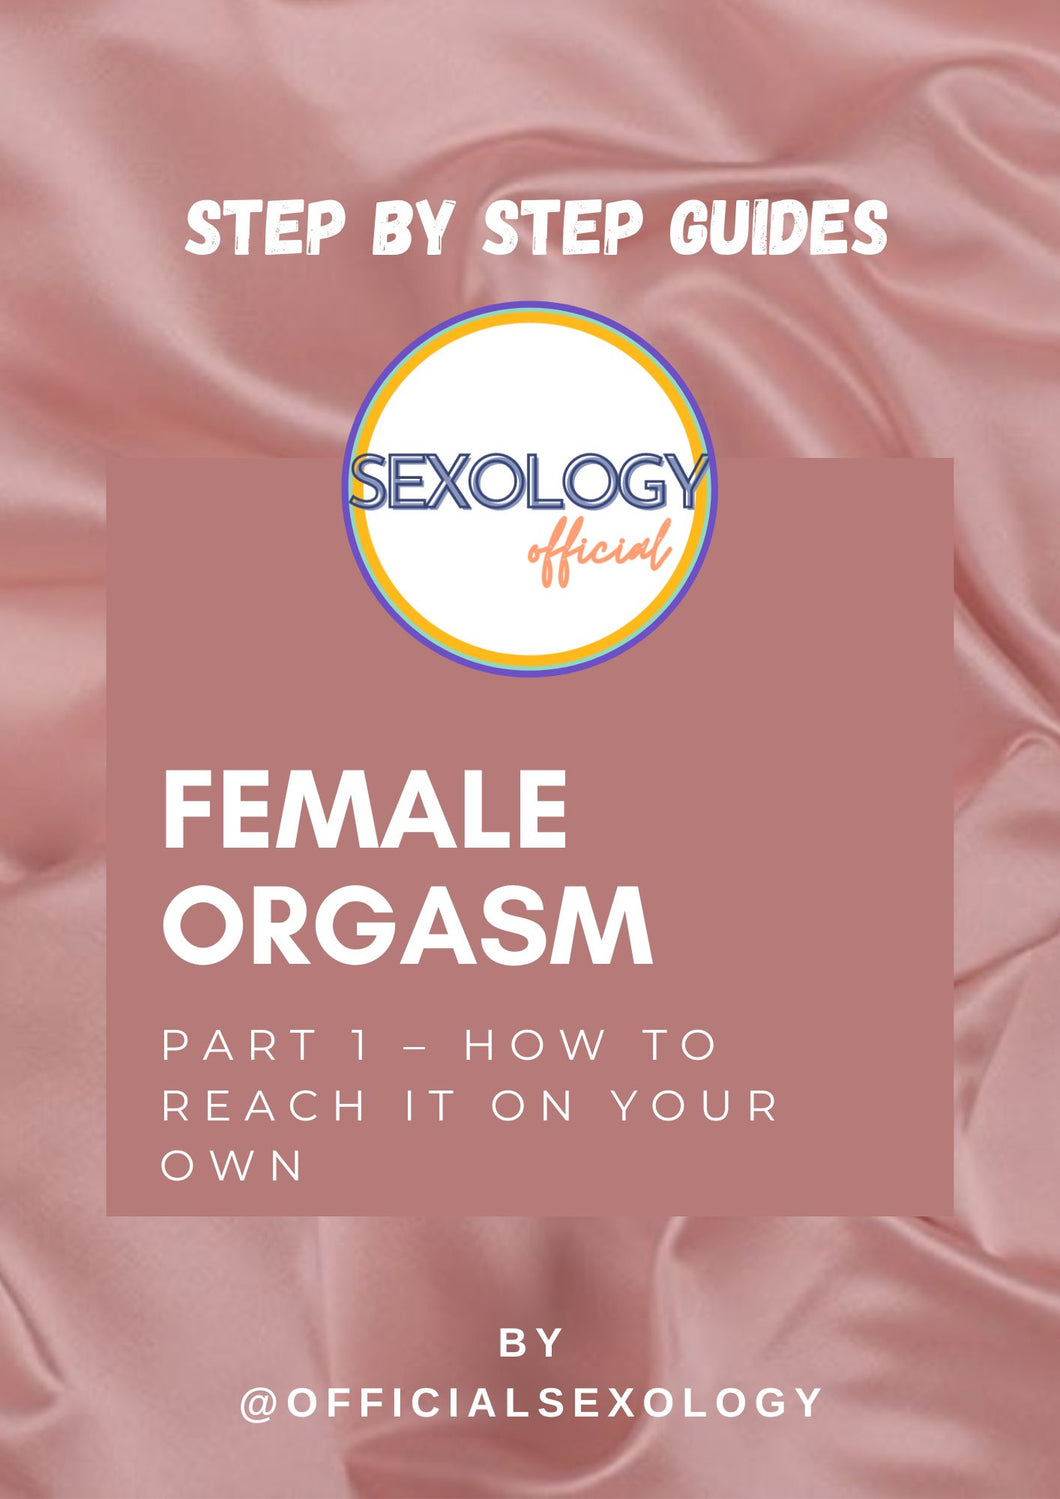 Female Orgasm - Part 1: How to reach it on your own